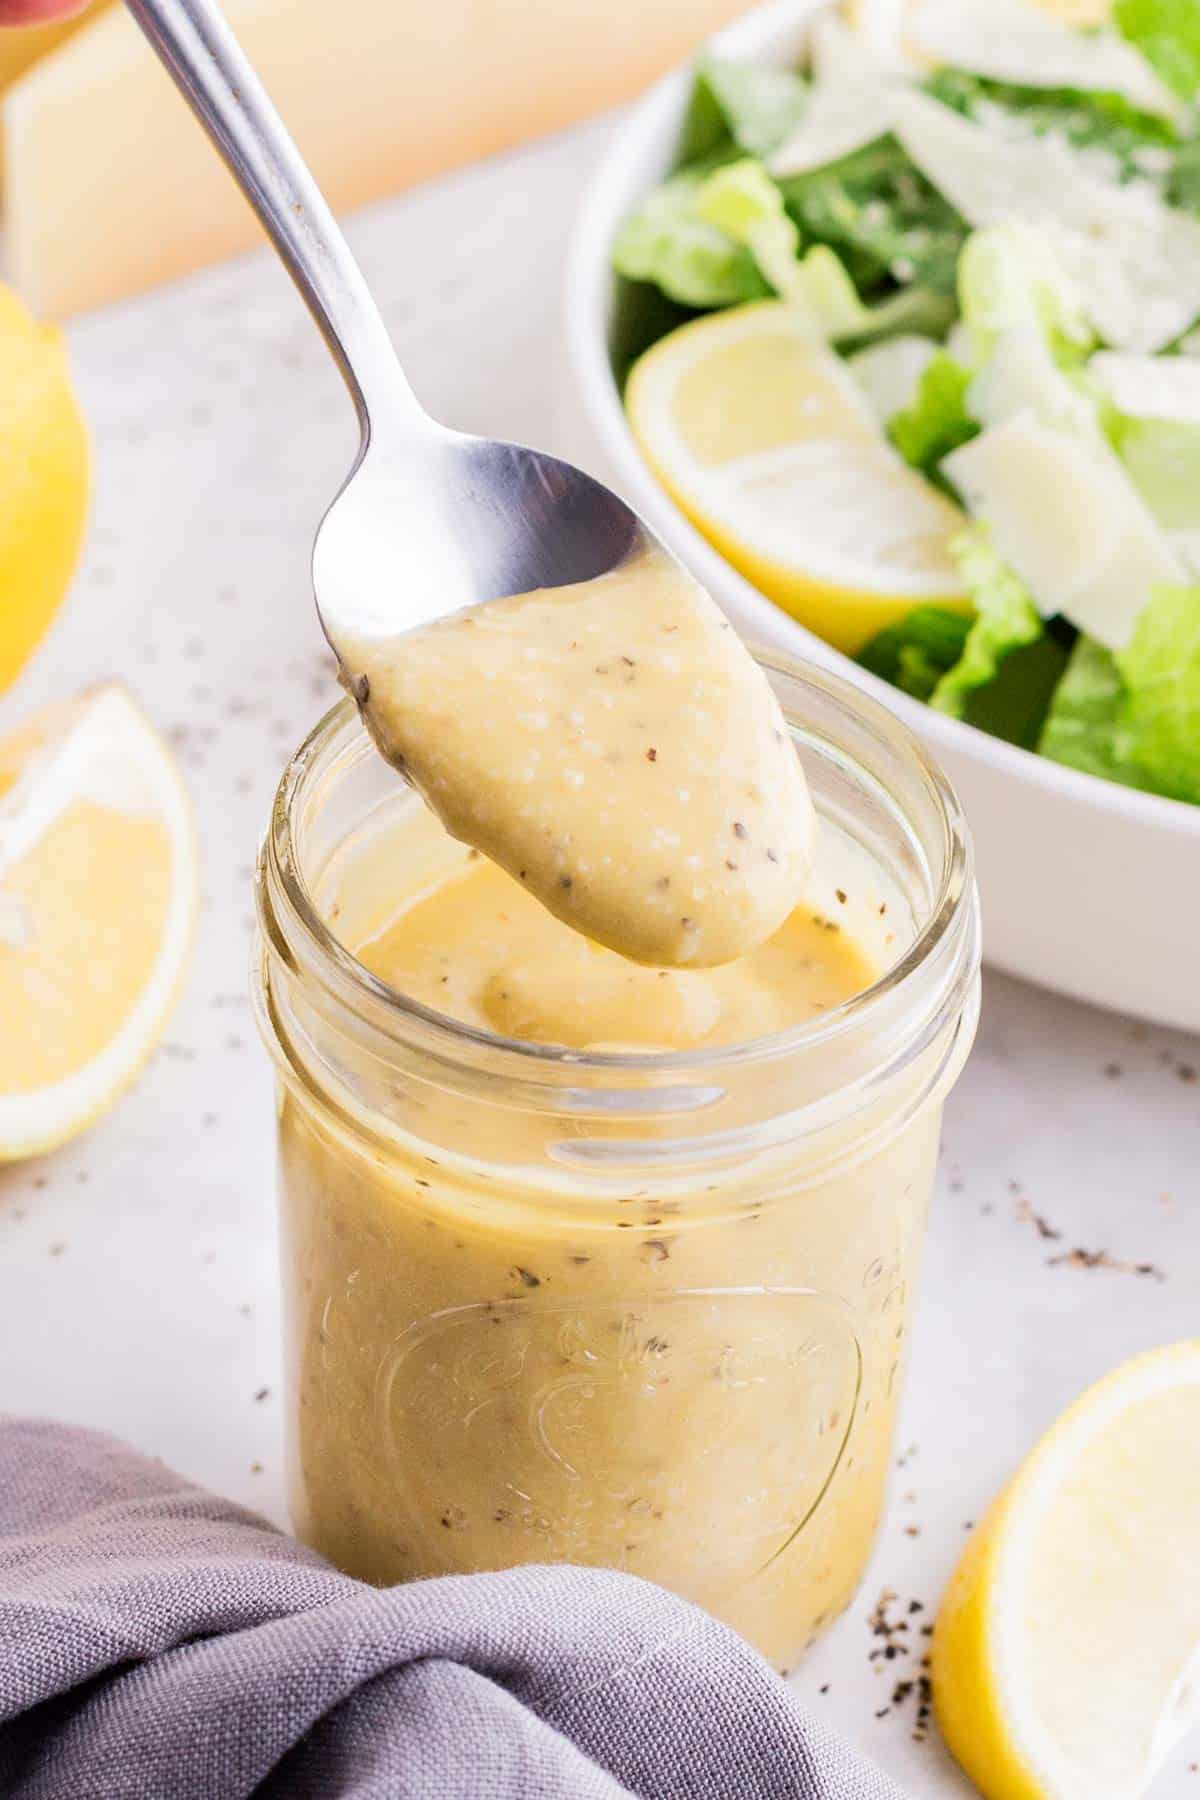 A spoon scoops out a serving of Caesar salad dressing.